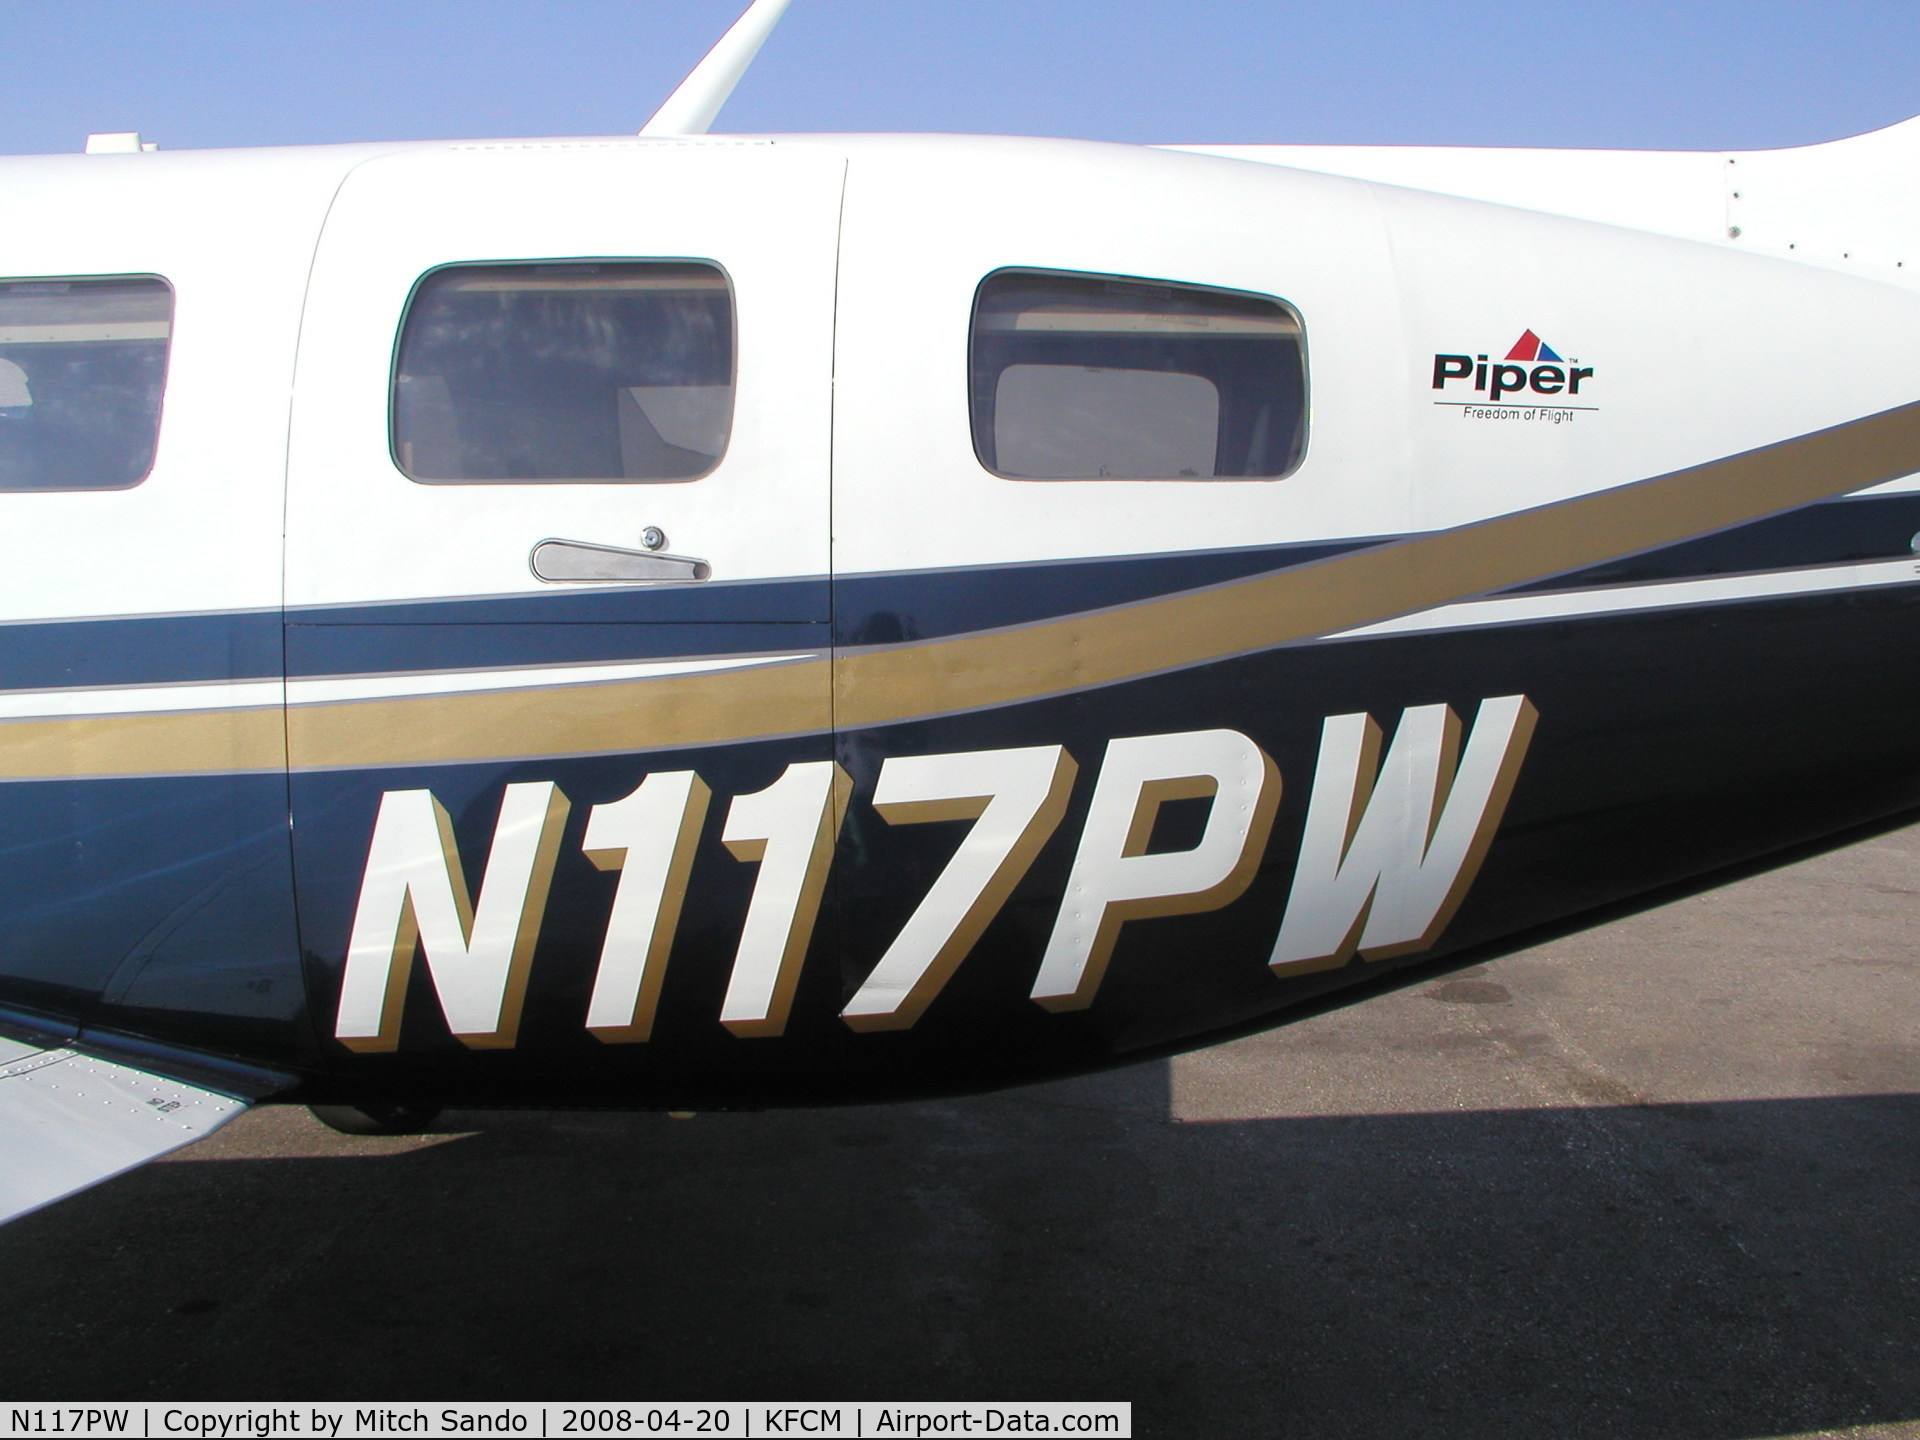 N117PW, 2001 Piper PA-46-500TP Malibu Meridian C/N 4697030, Parked on the ramp at ASI Jet Center.